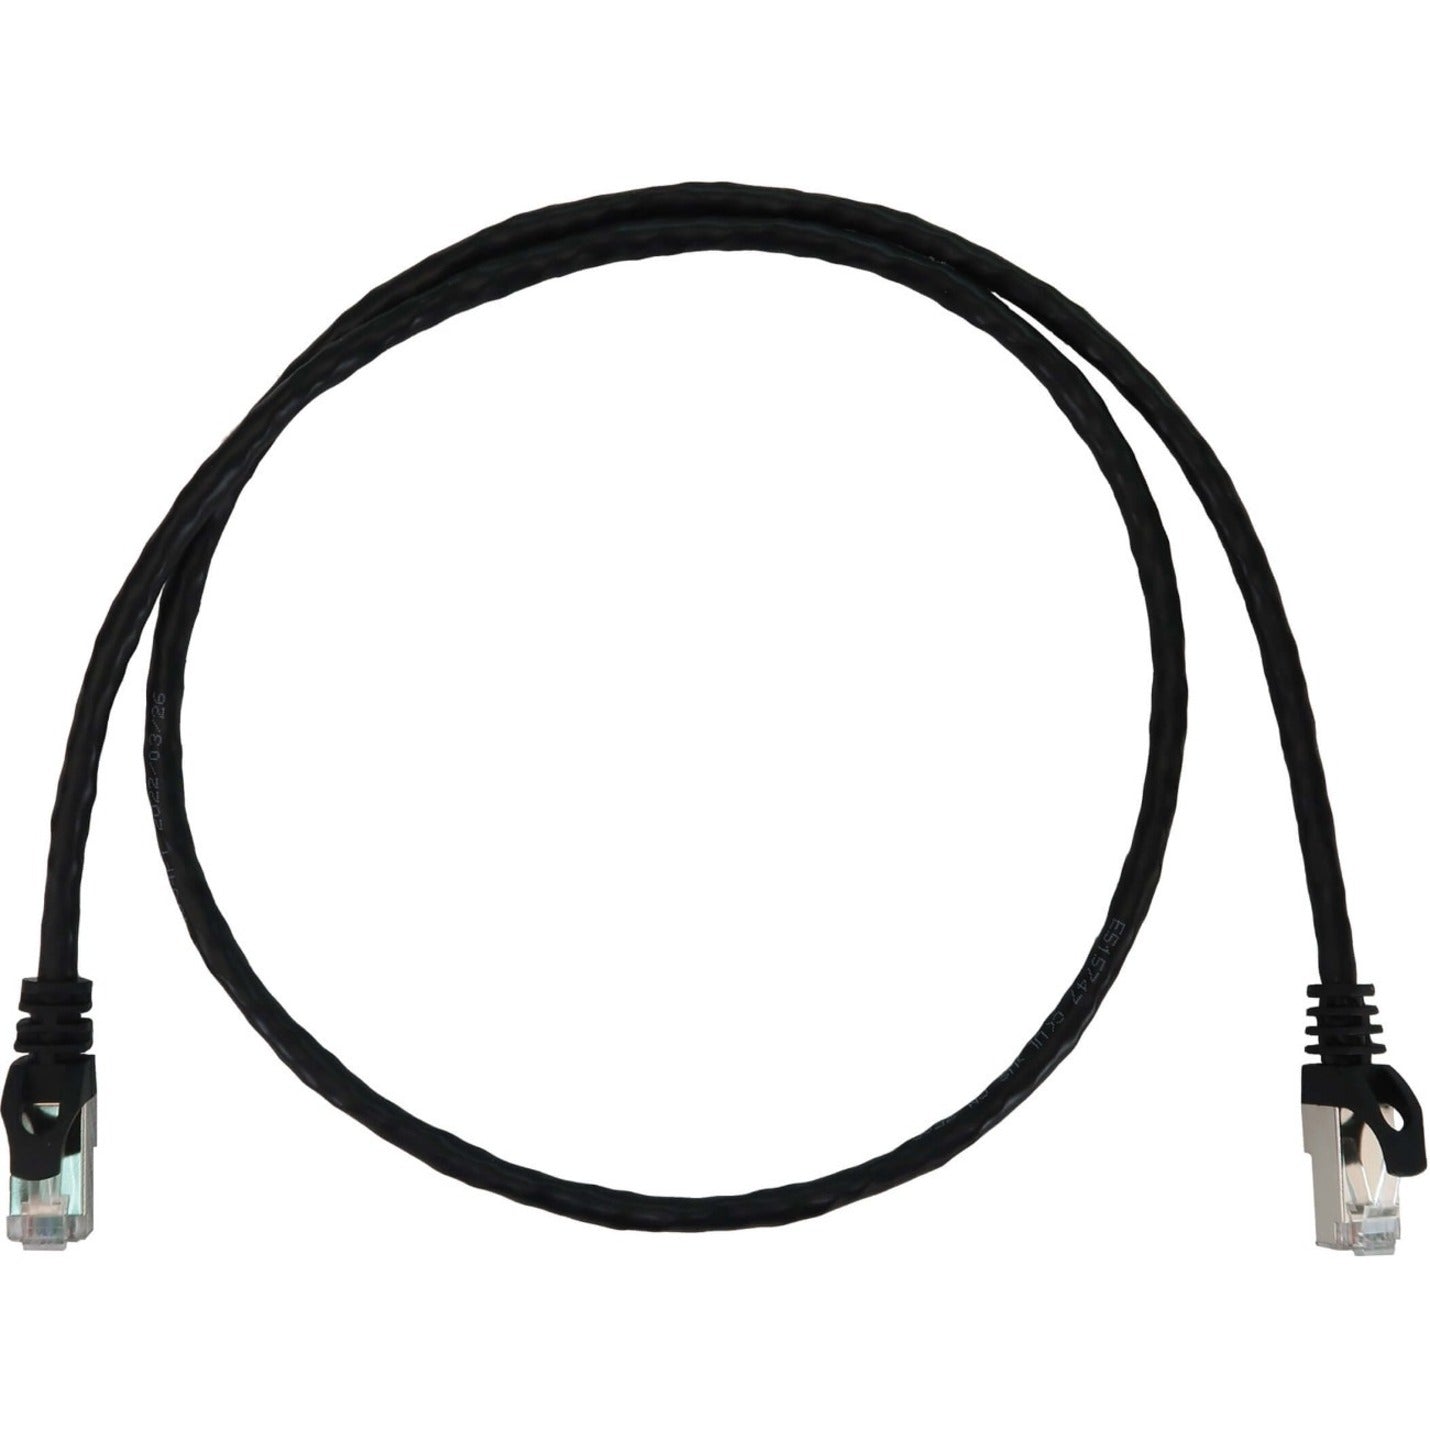 Tripp Lite N262-S03-BK Cat6a STP Patch Network Cable, 3ft, 10G, Snagless, Shielded, Black